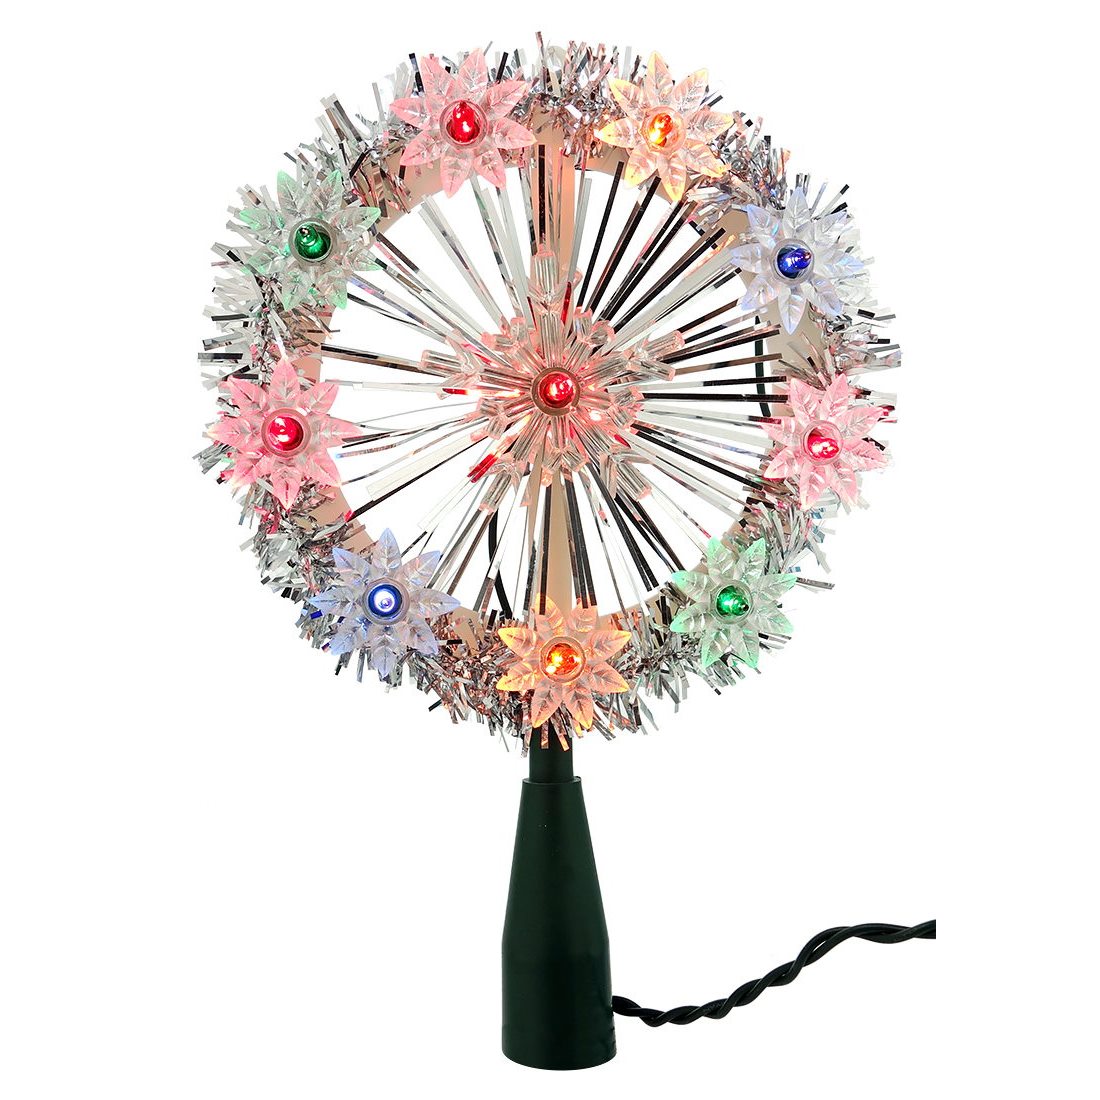 Snowflake With Multi-Color Lights Tree Topper